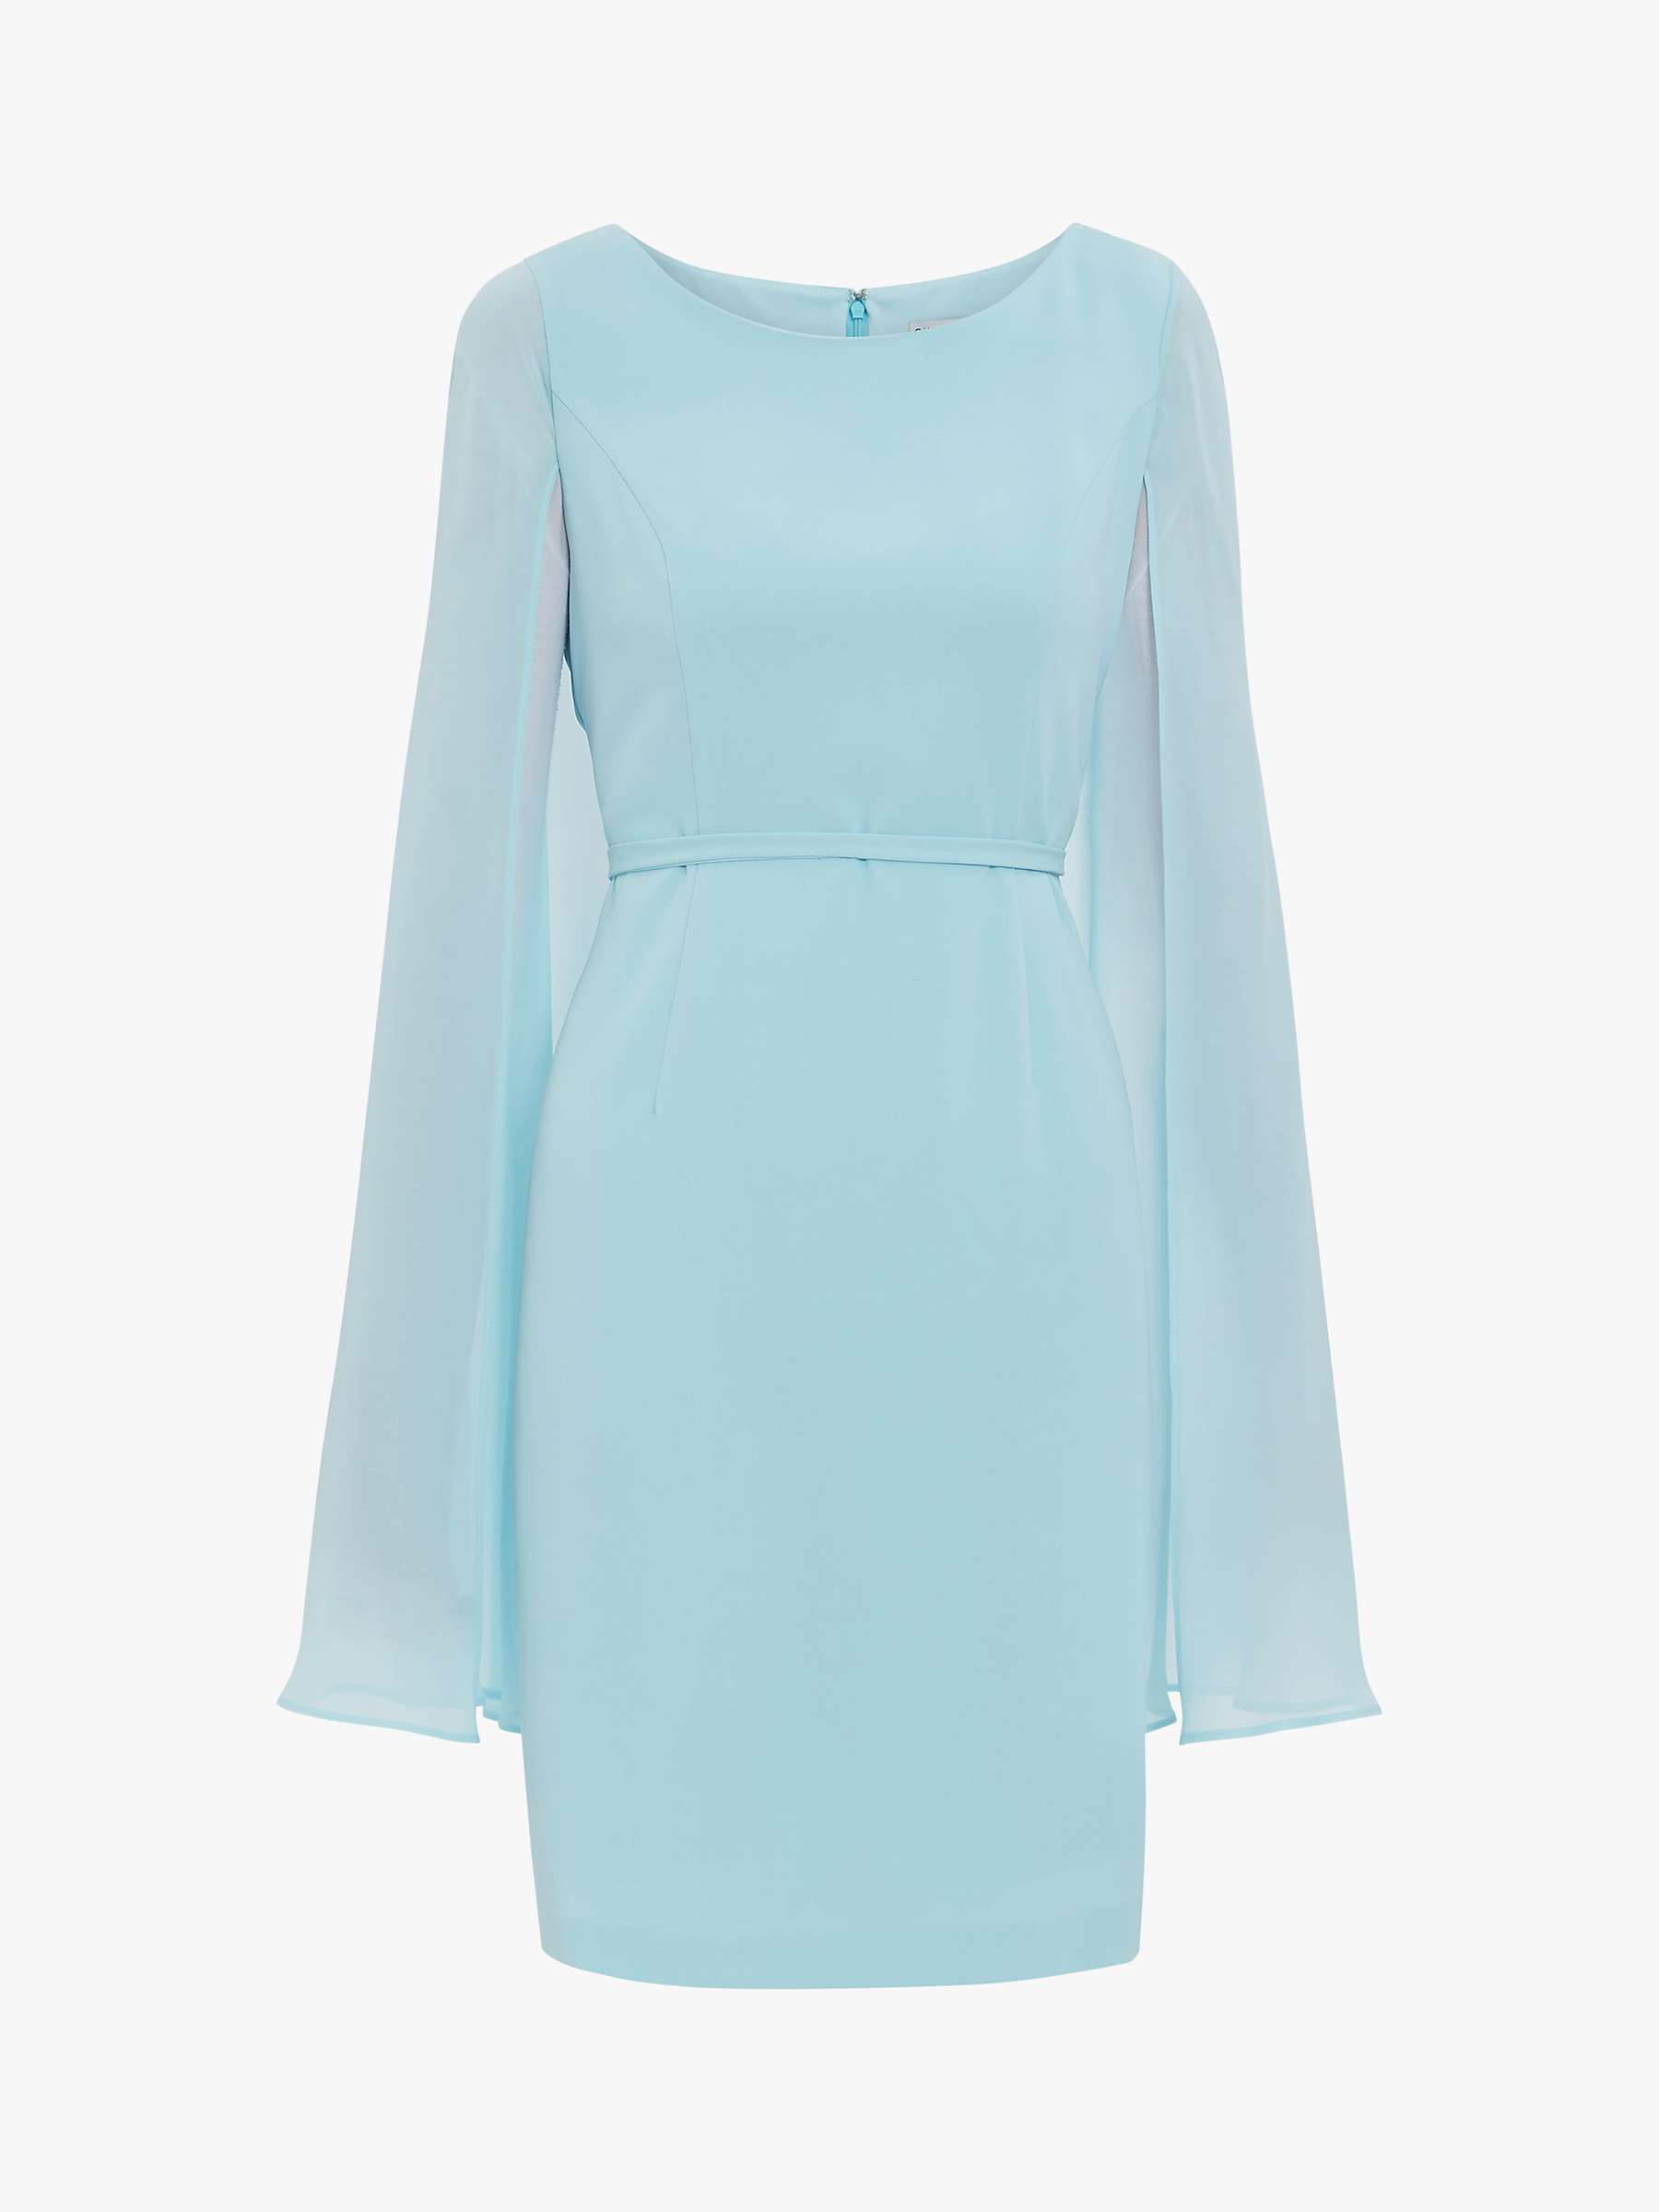 Buy Gina Bacconi Bevin Crepe And Chiffon Cape Dress Online at johnlewis.com